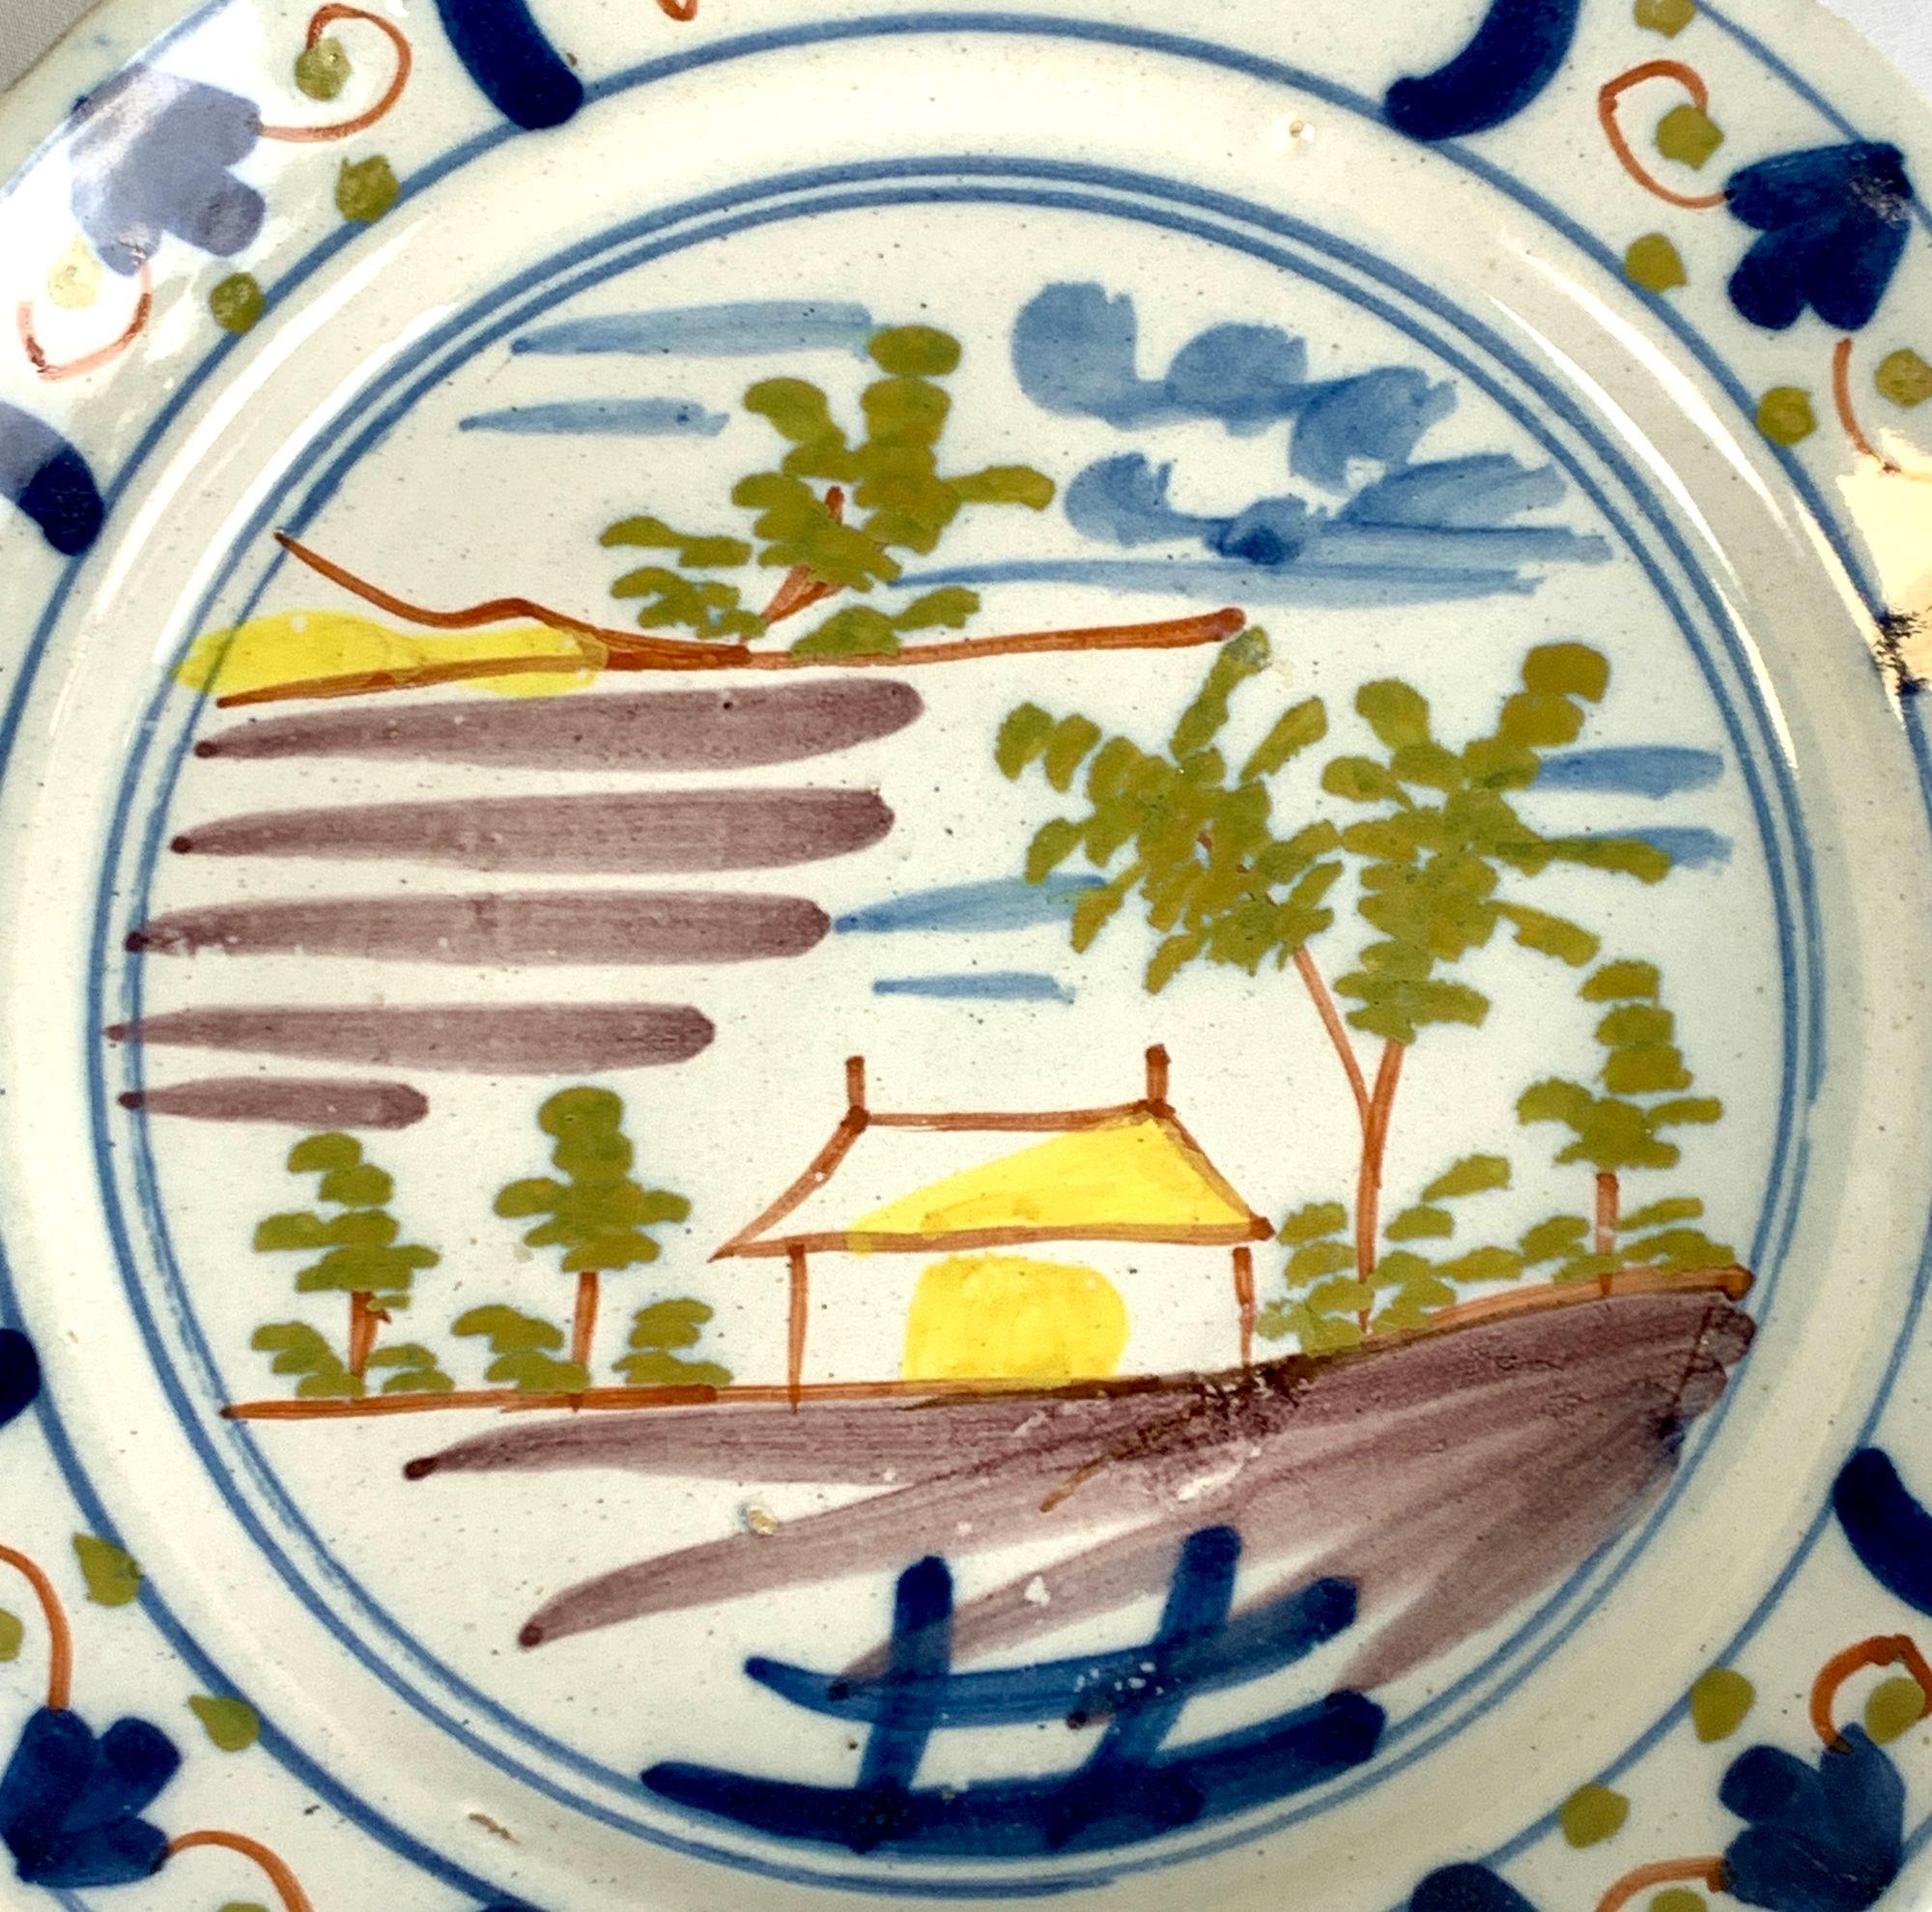 This is an 18th-century Dutch Delft pancake plate hand painted circa 1780.
The artist used the polychrome colors moss green, red, blue, and manganese brown to create a lovely painting of a quaint country cottage surrounded by a garden.
The cottage